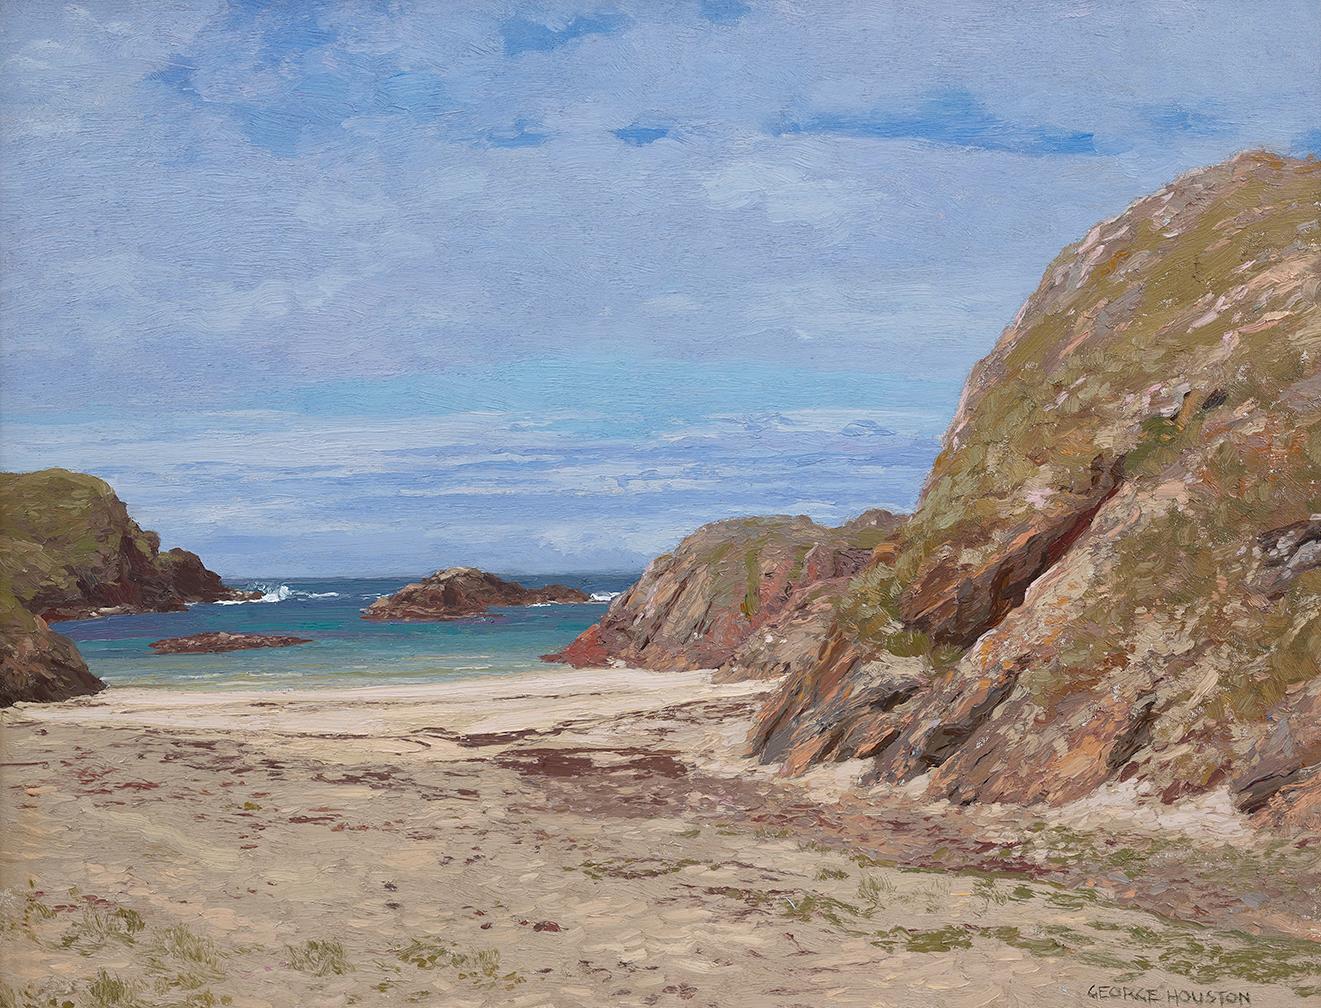 'The West Coast of Scotland' 20th Century landscape painting of rocks, beach - Painting by George Houston